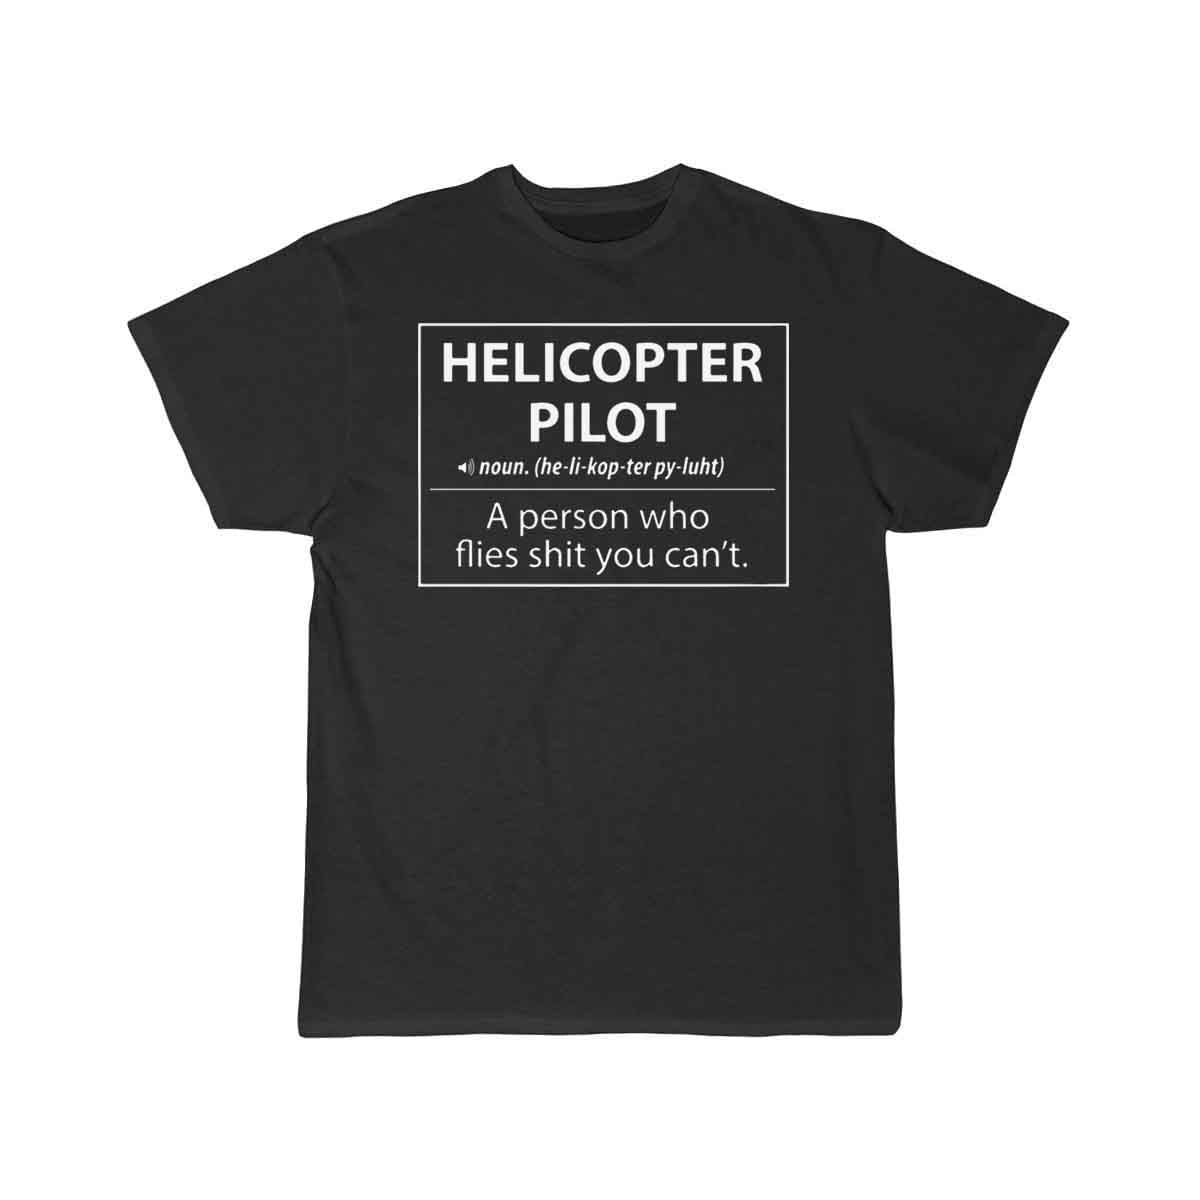 Helicopter Pilot a person who flies shit you can't T-SHIRT THE AV8R